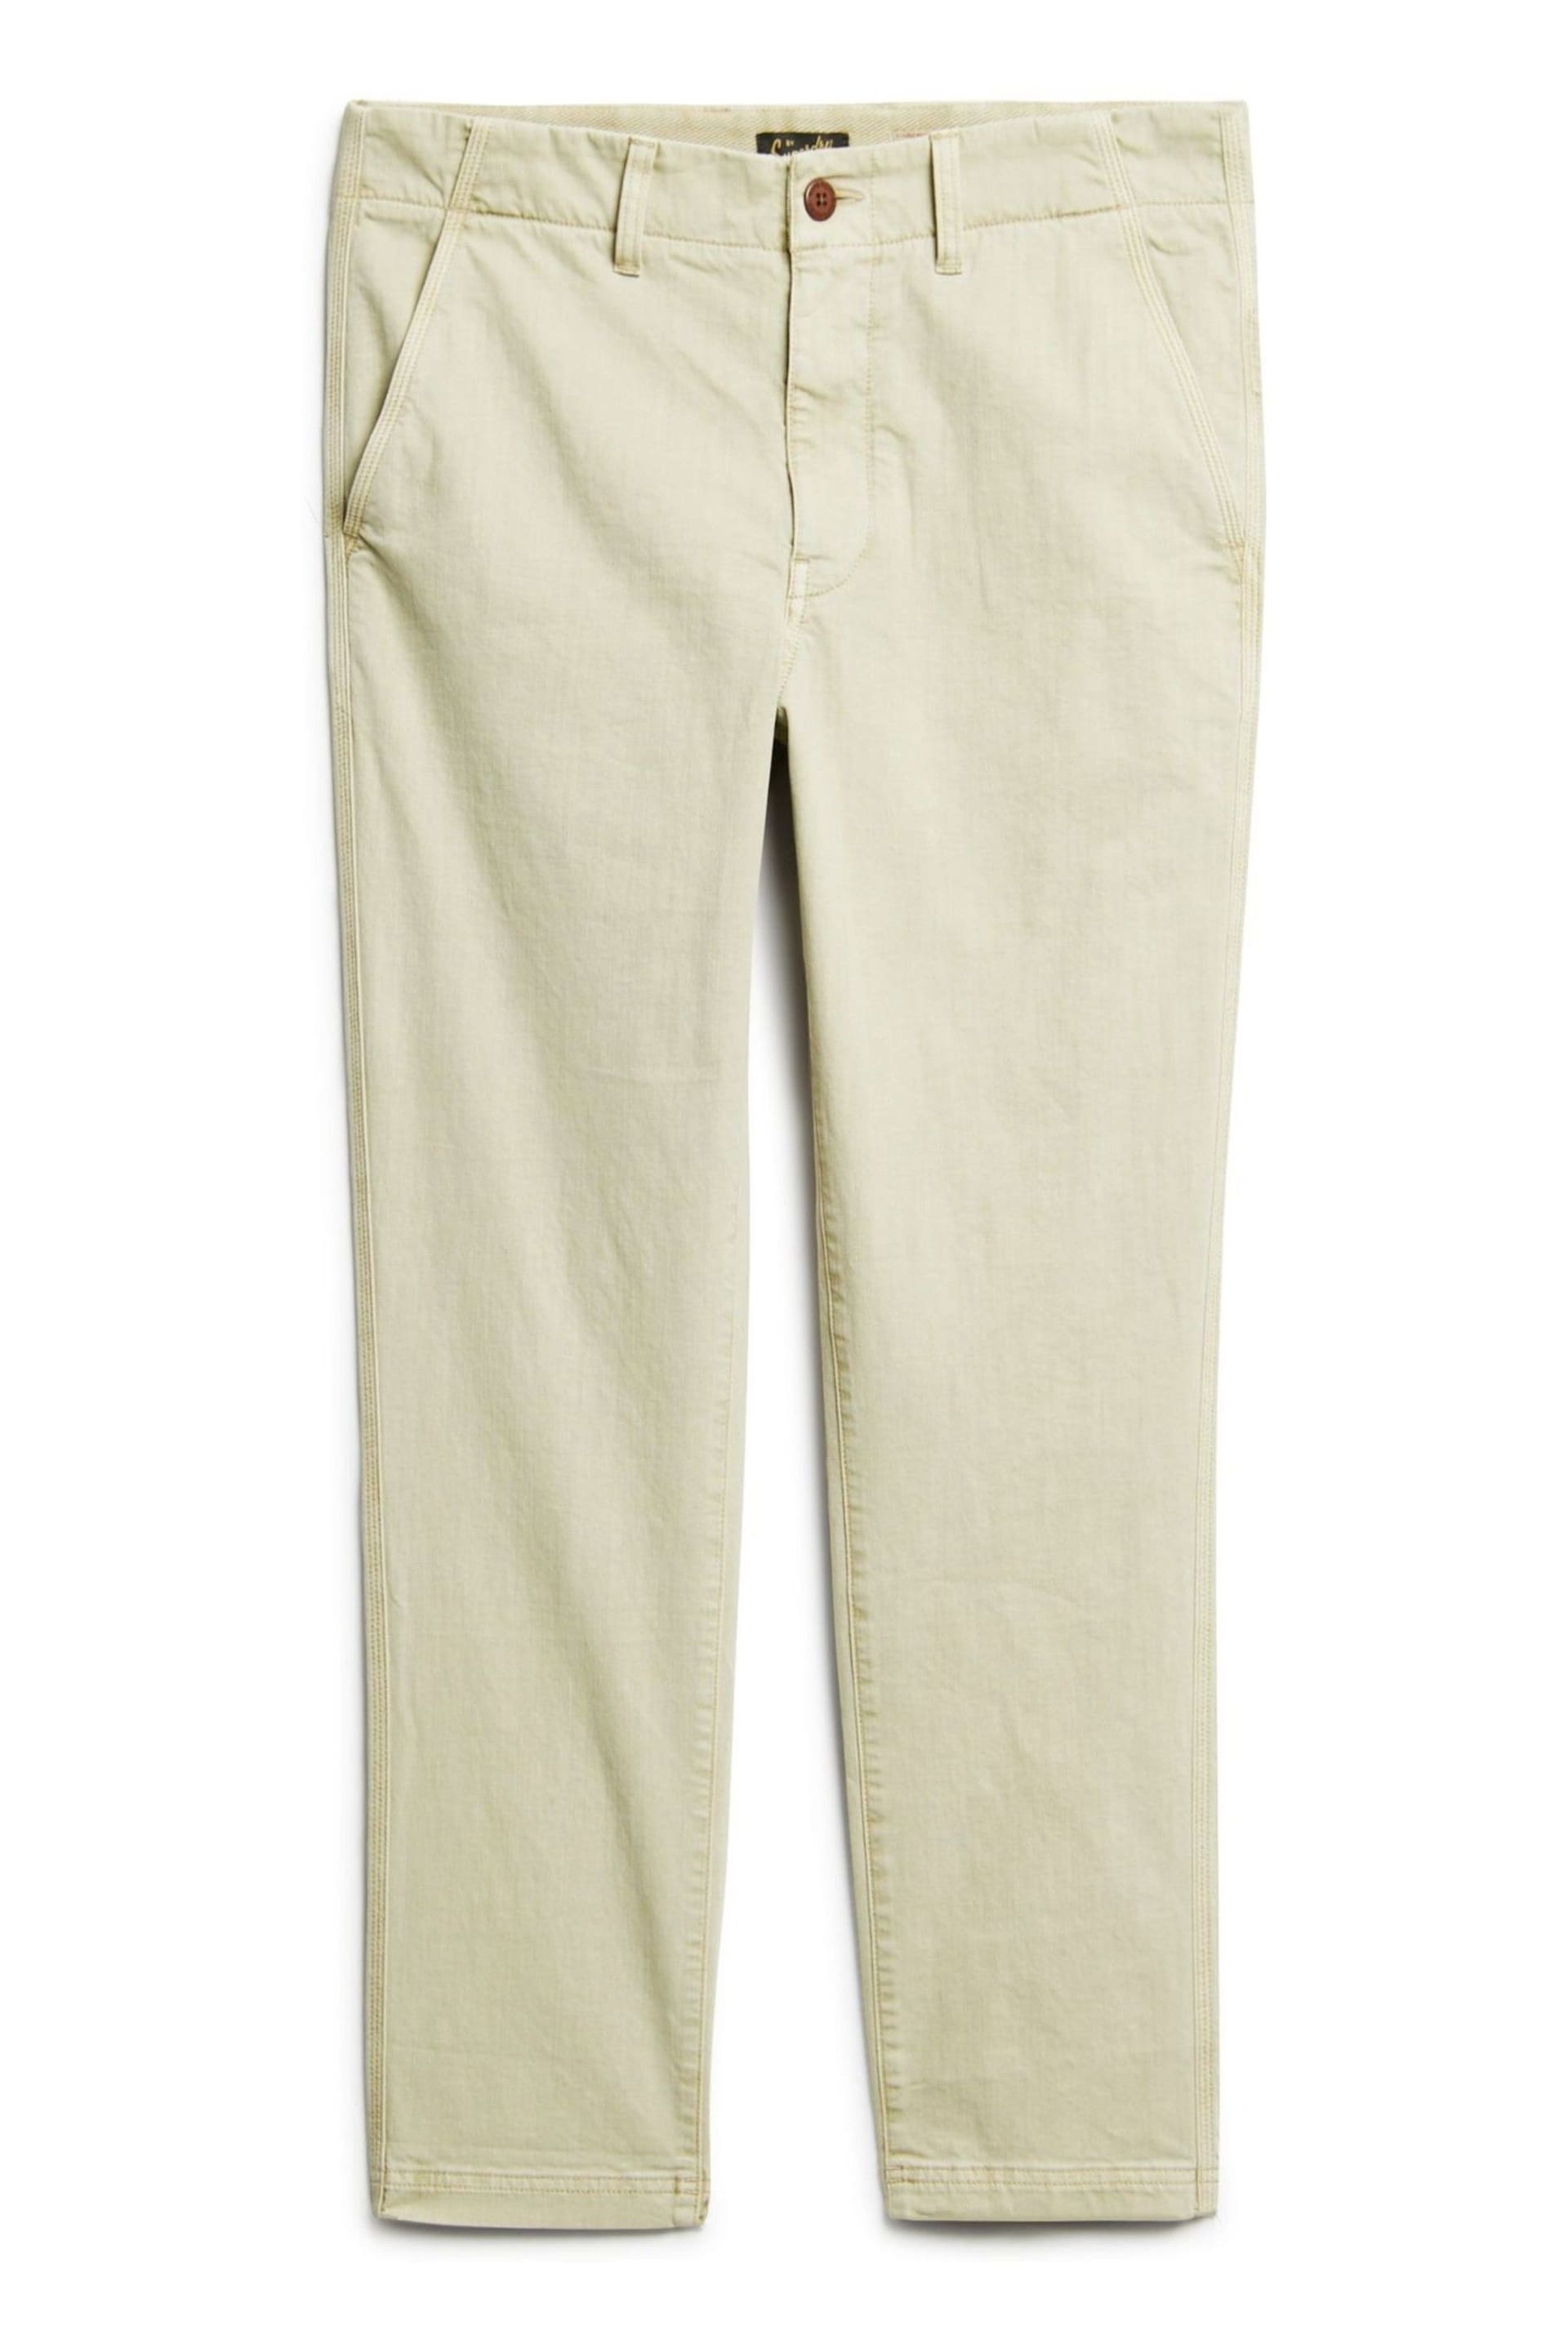 Superdry Natural International Chino Trousers - Image 6 of 8